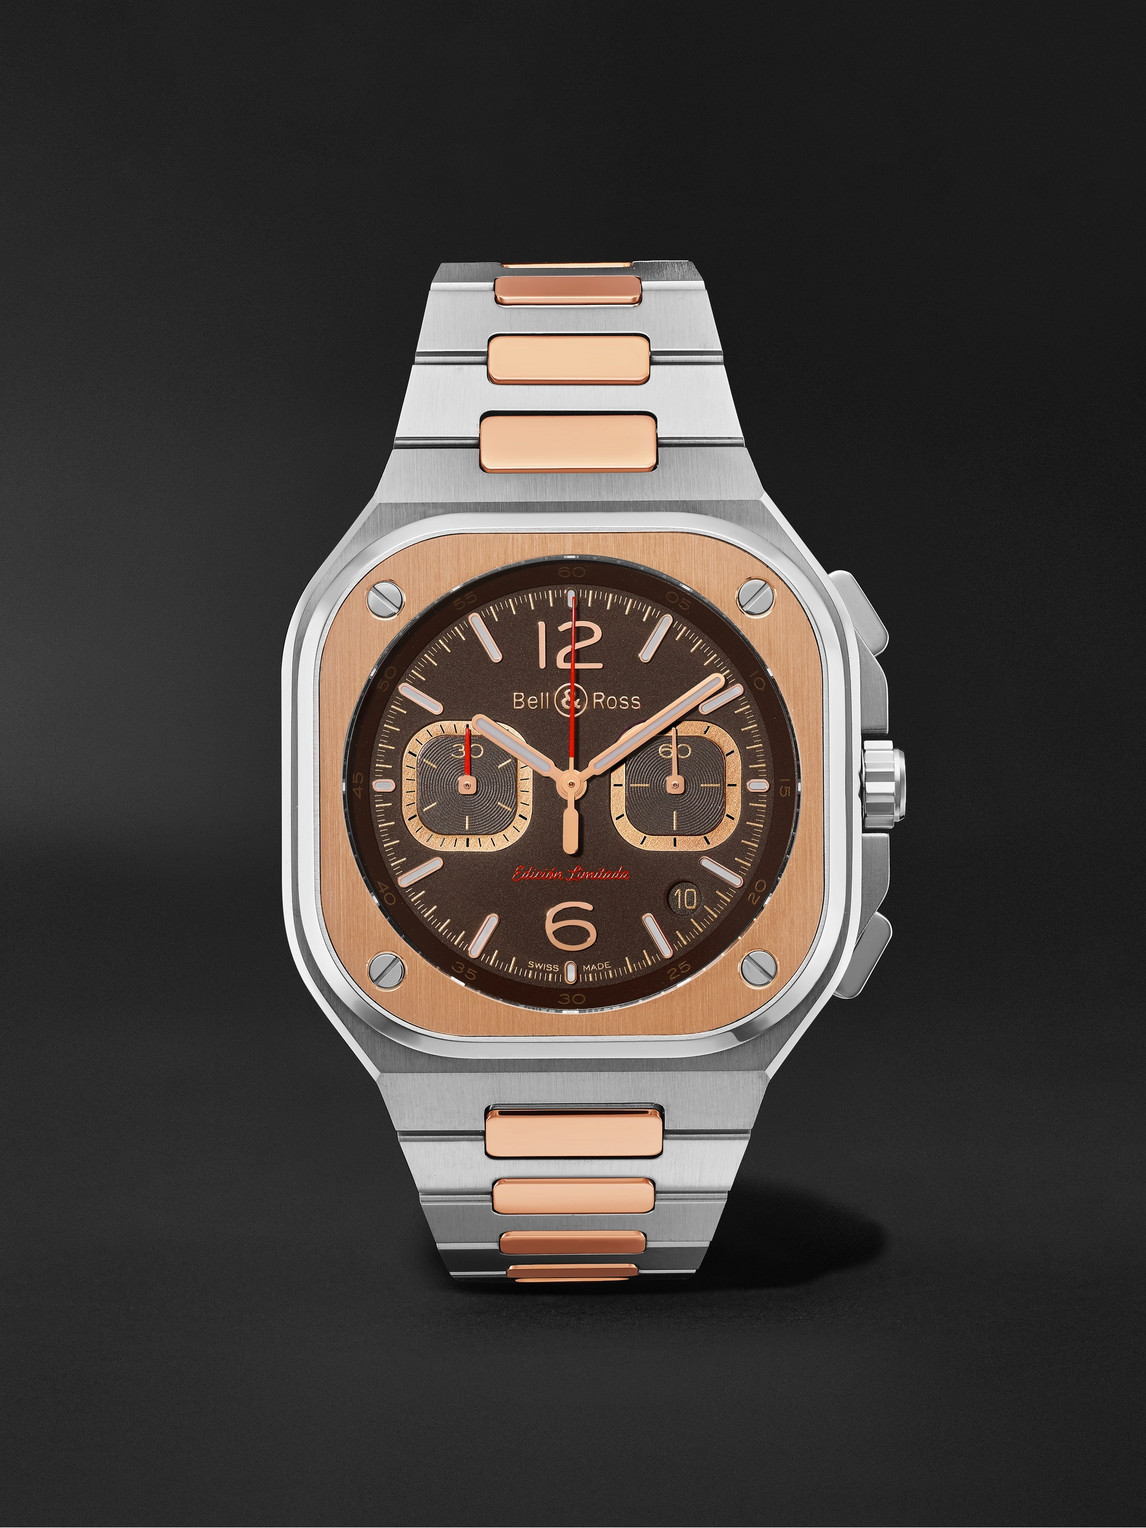 BR 05 Limited Edition Automatic Chronograph 42mm Stainless Steel and Rose Gold Watch, Ref. No. BR05C-LDA/SSG